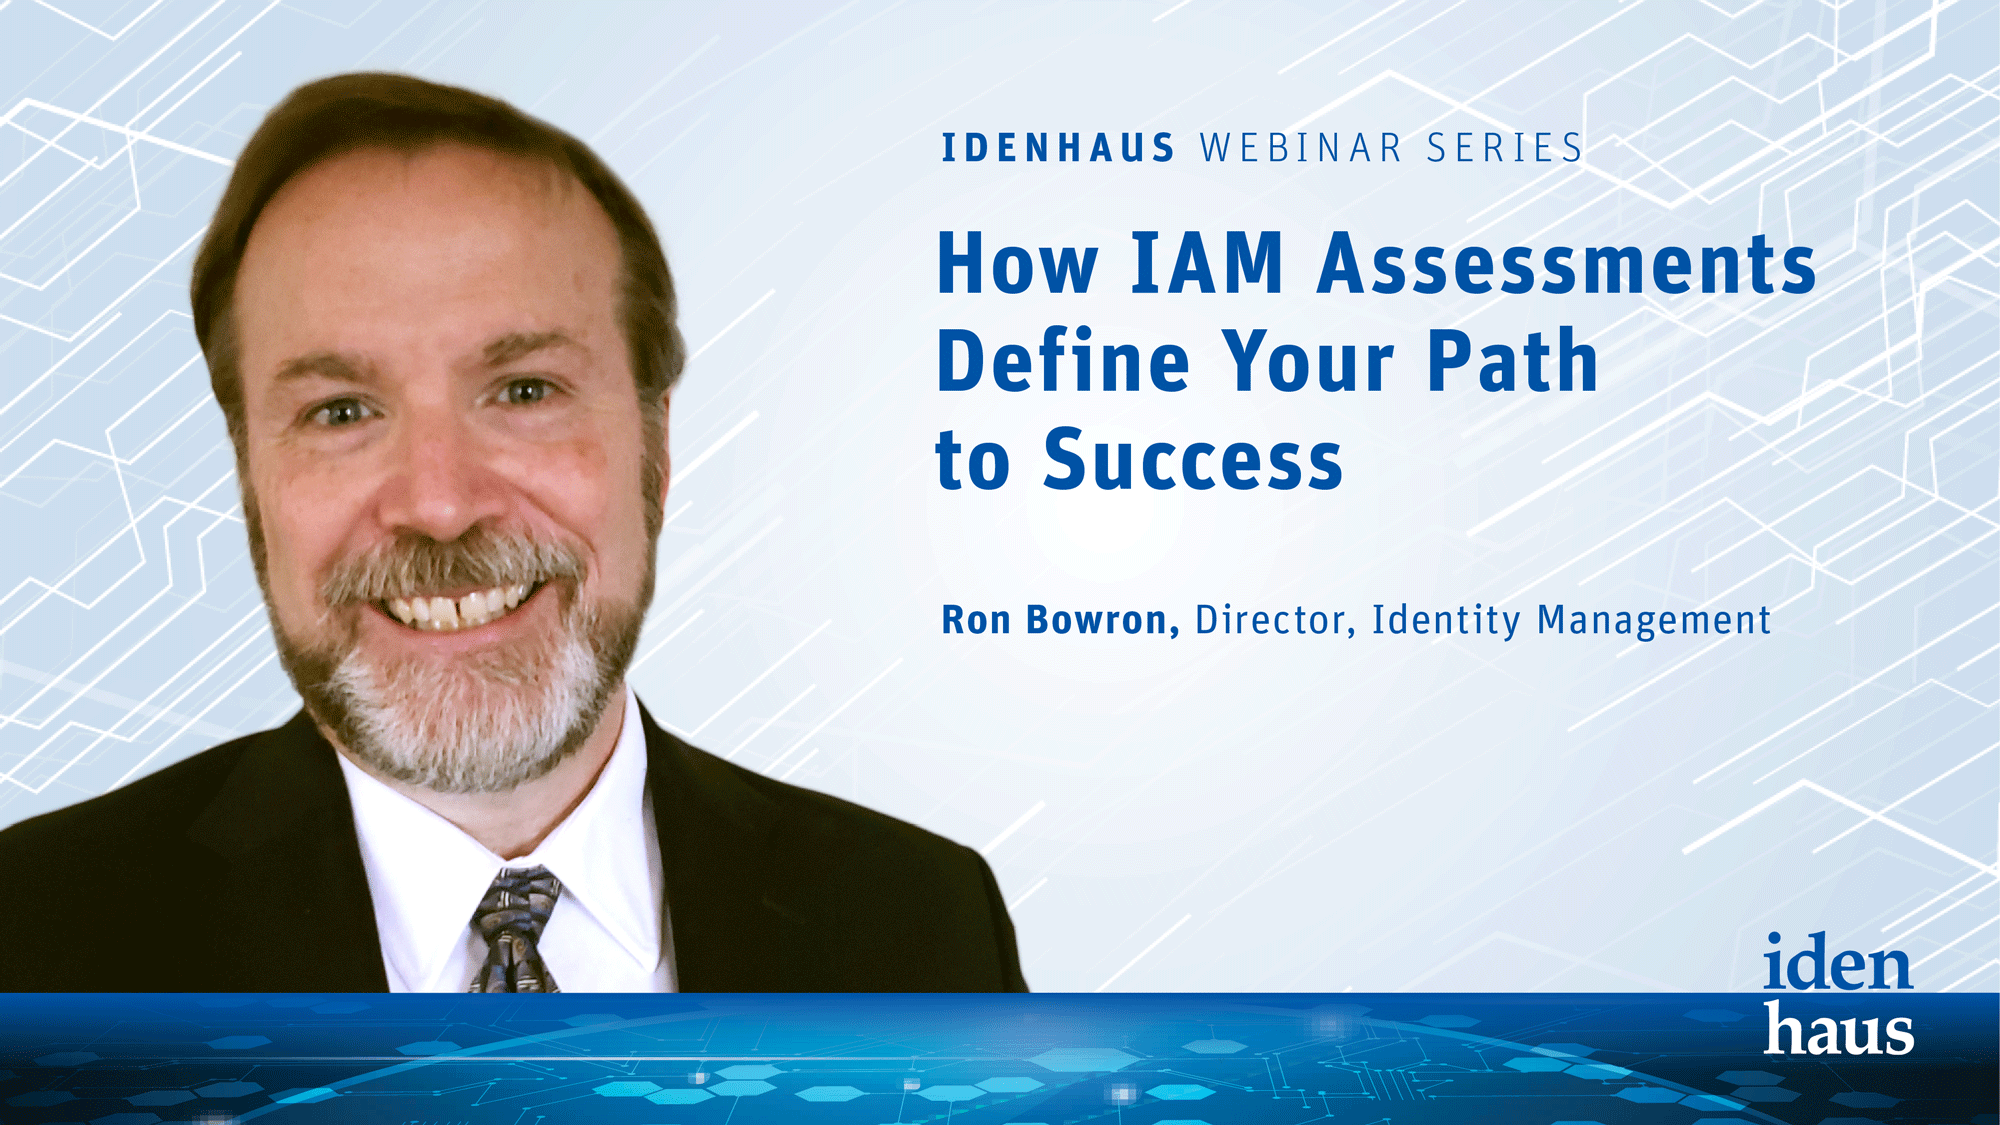 iam assessments define your path to success